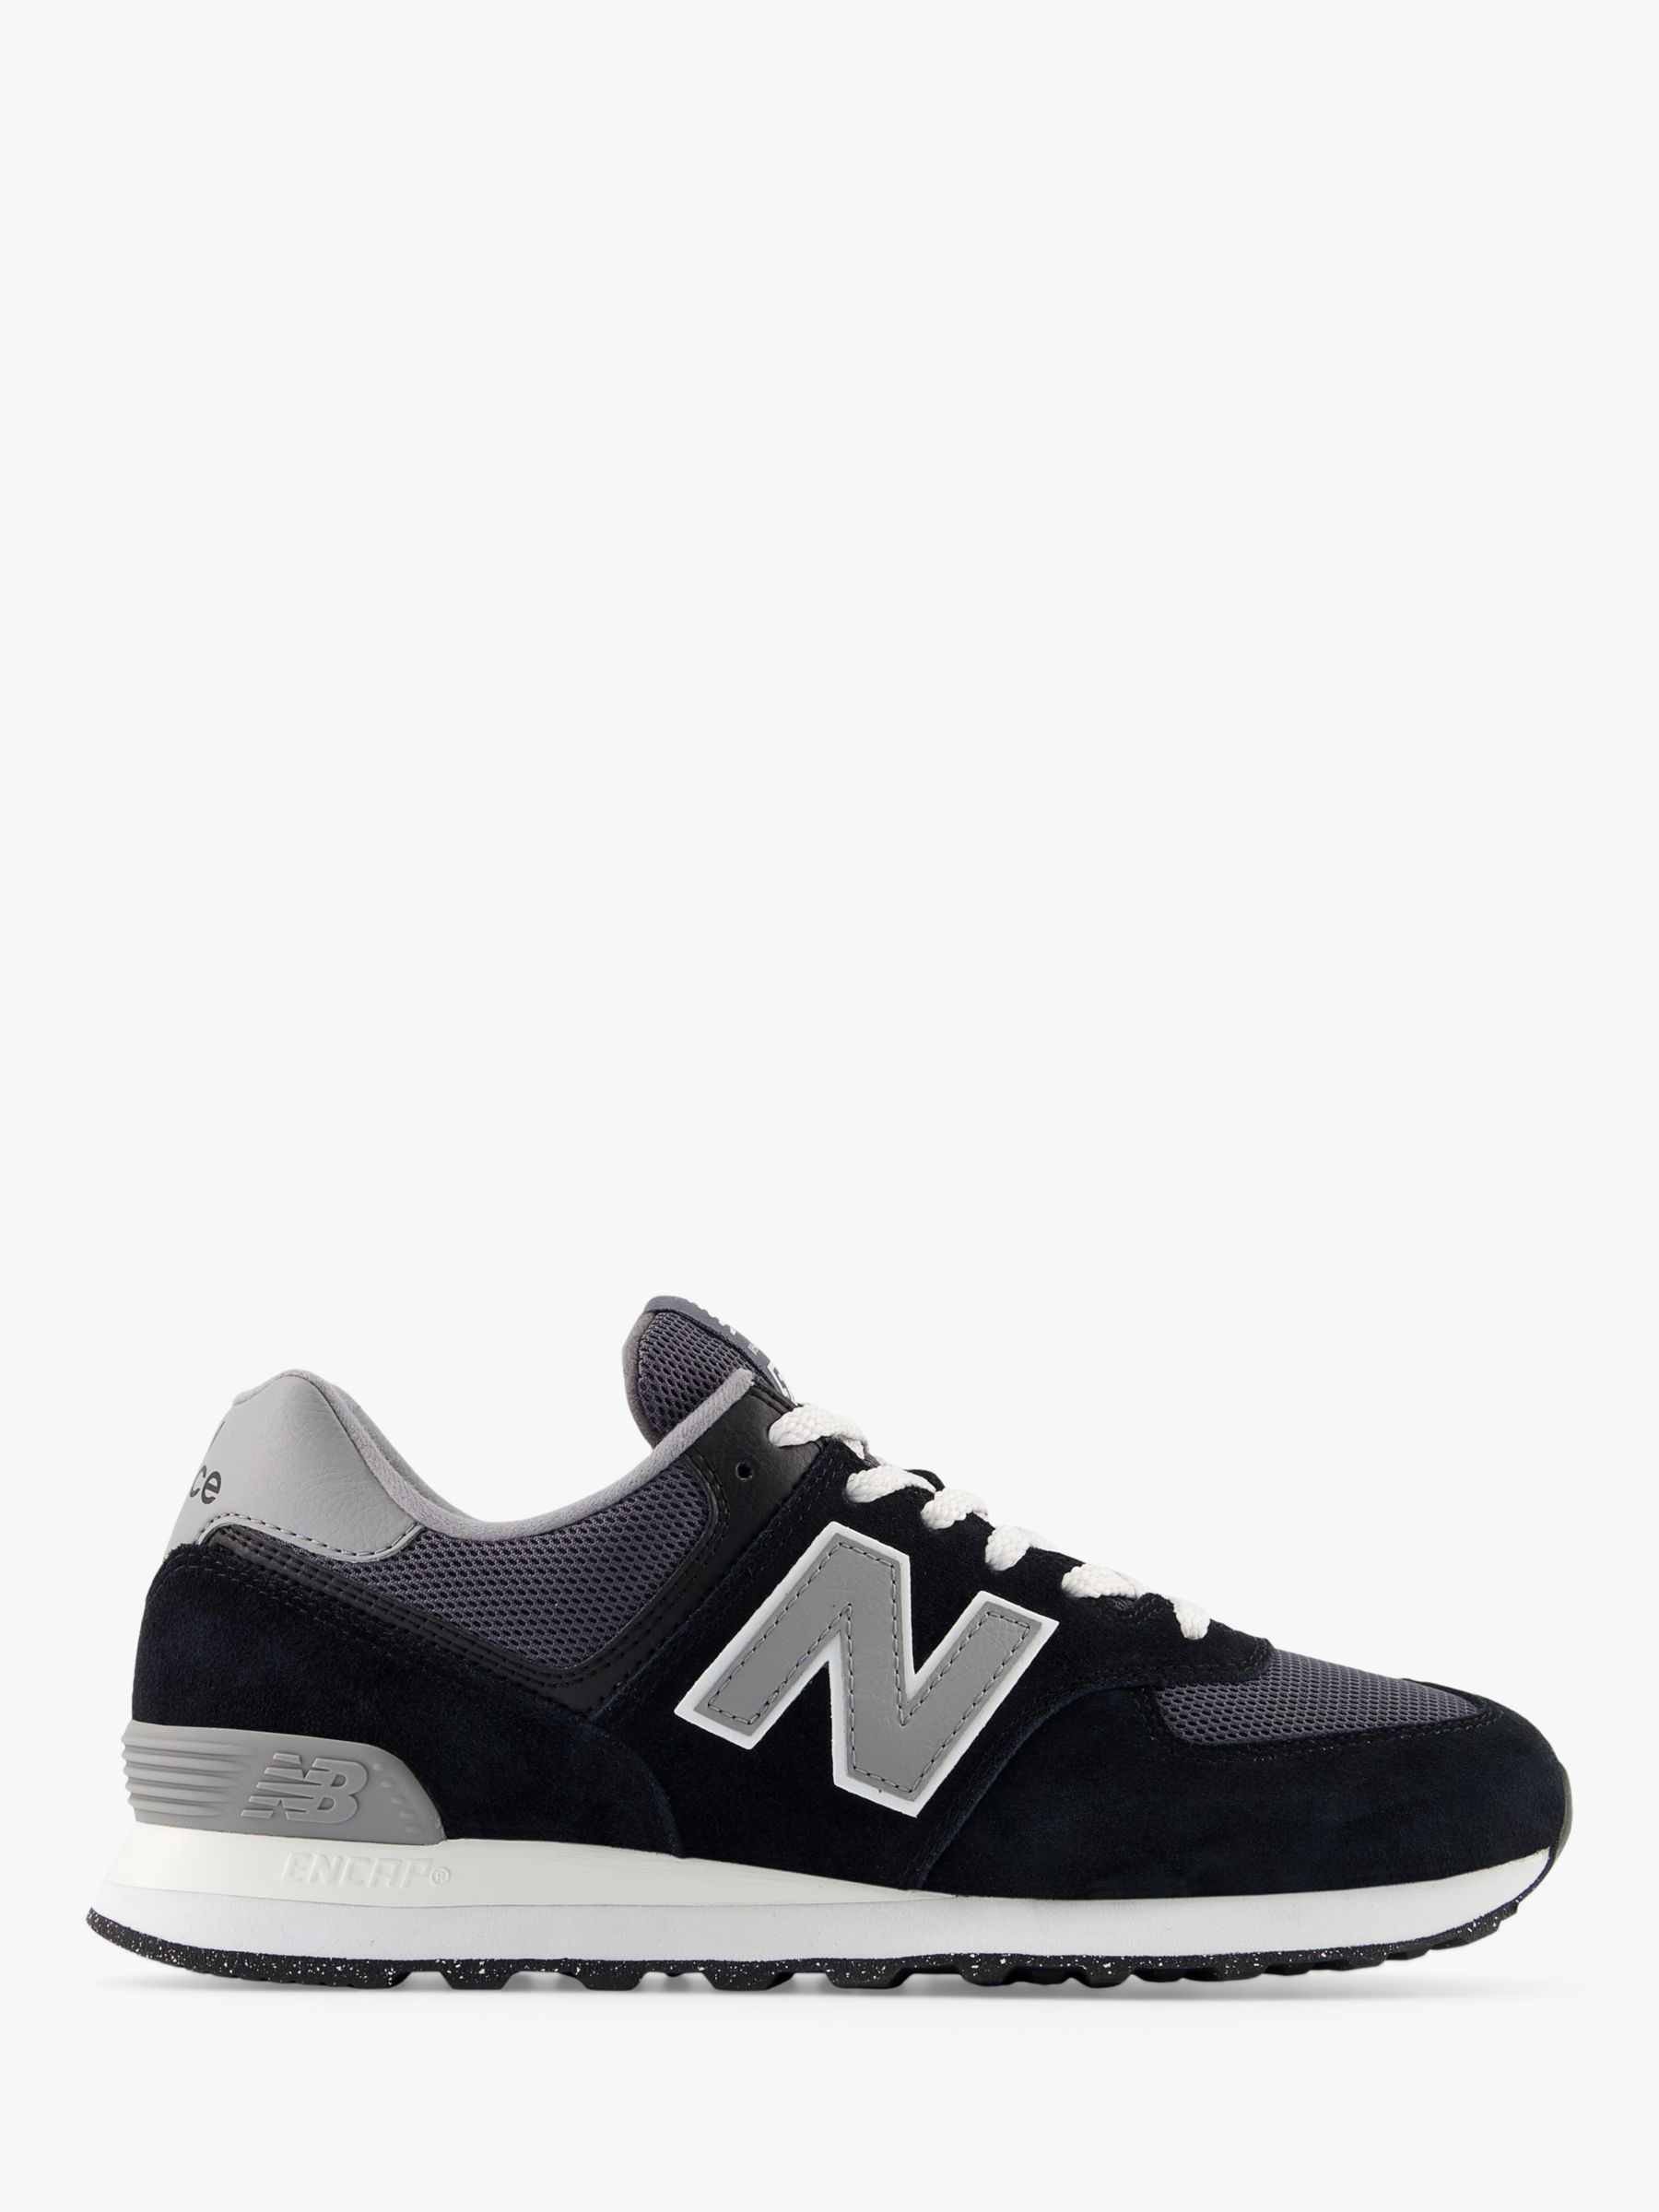 New Balance 574 Suede Trainers, Black/Grey at John Lewis & Partners